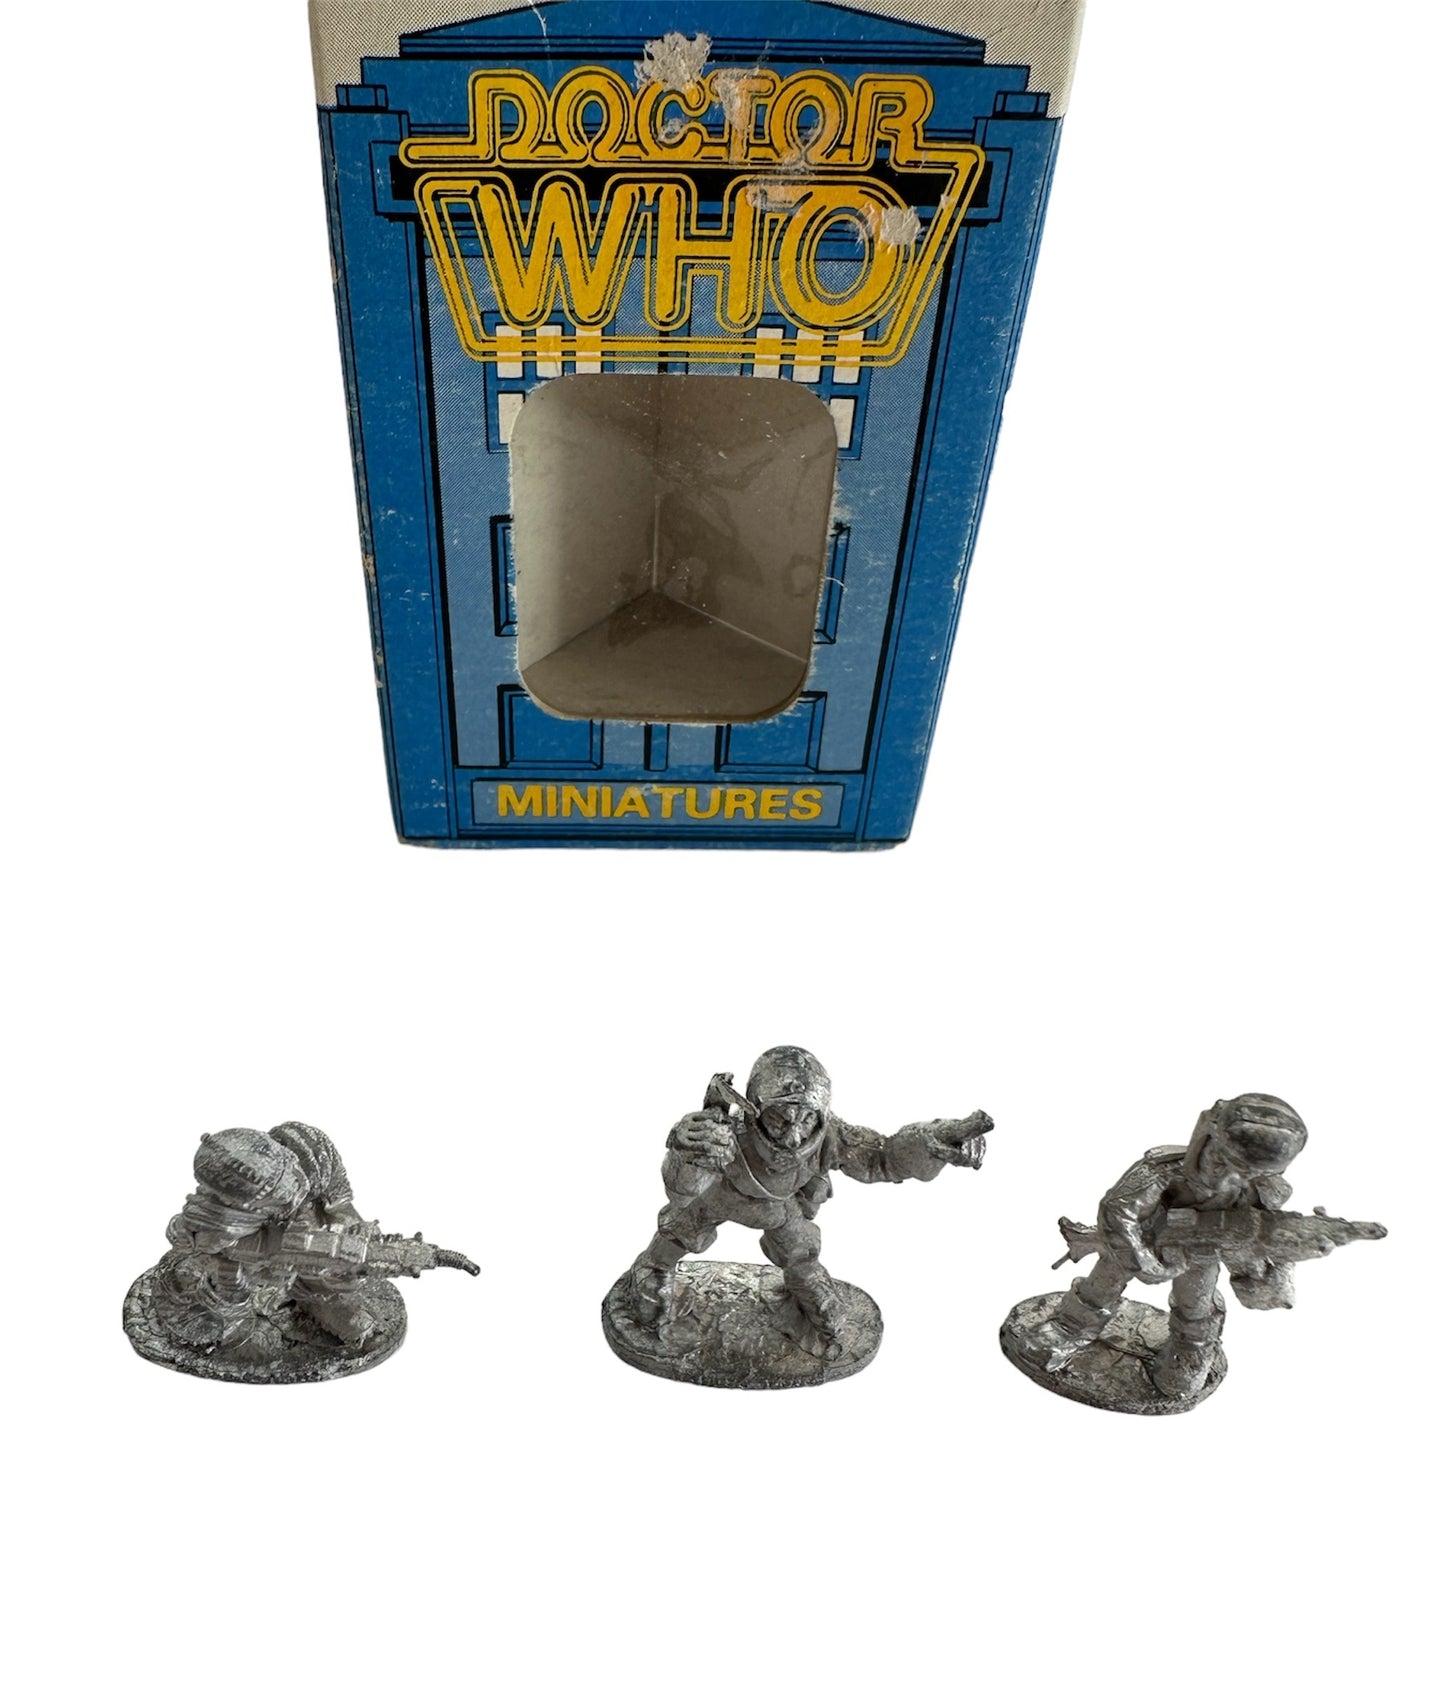 Vintage FASA Corp 1986 Doctor Dr Who Citadel Miniatures Metal Figures No. 9508 - Temporal Marauders - Set Of 3 Figures - In The Original Box - Shop Stock Room Find